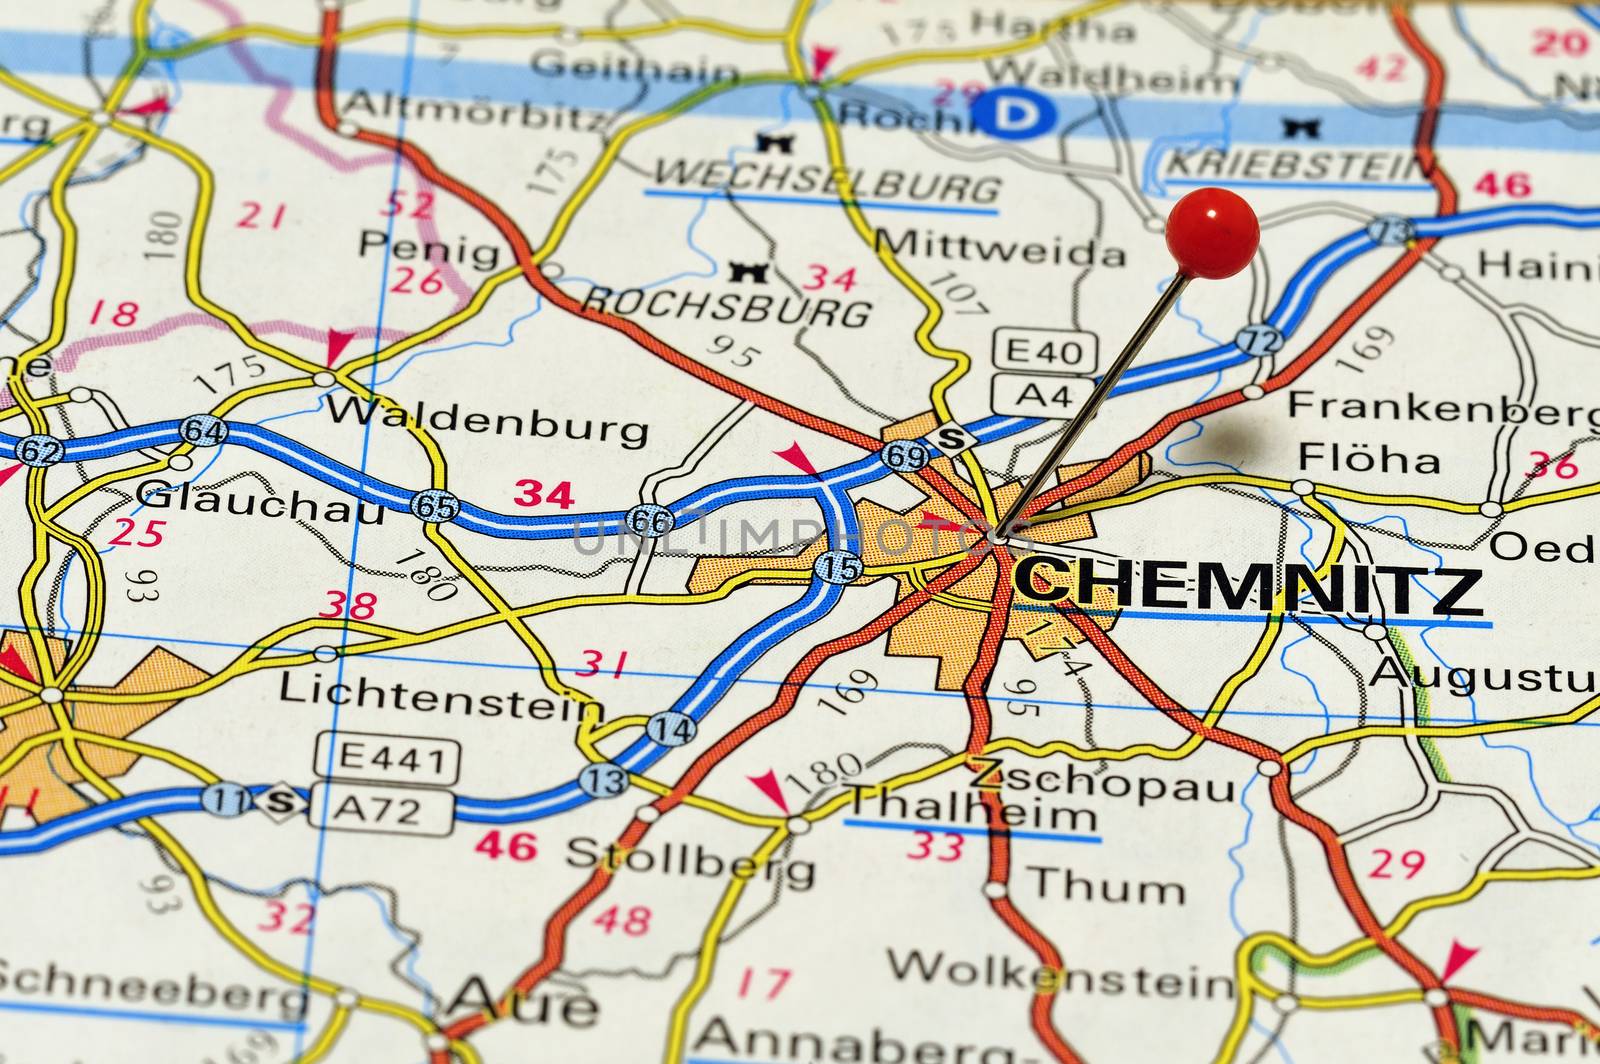 Closeup map of Chemnitz. Chemnitz is a city in southeastern Germany. It is located in Saxony about 40 kilometers from the Czech border.